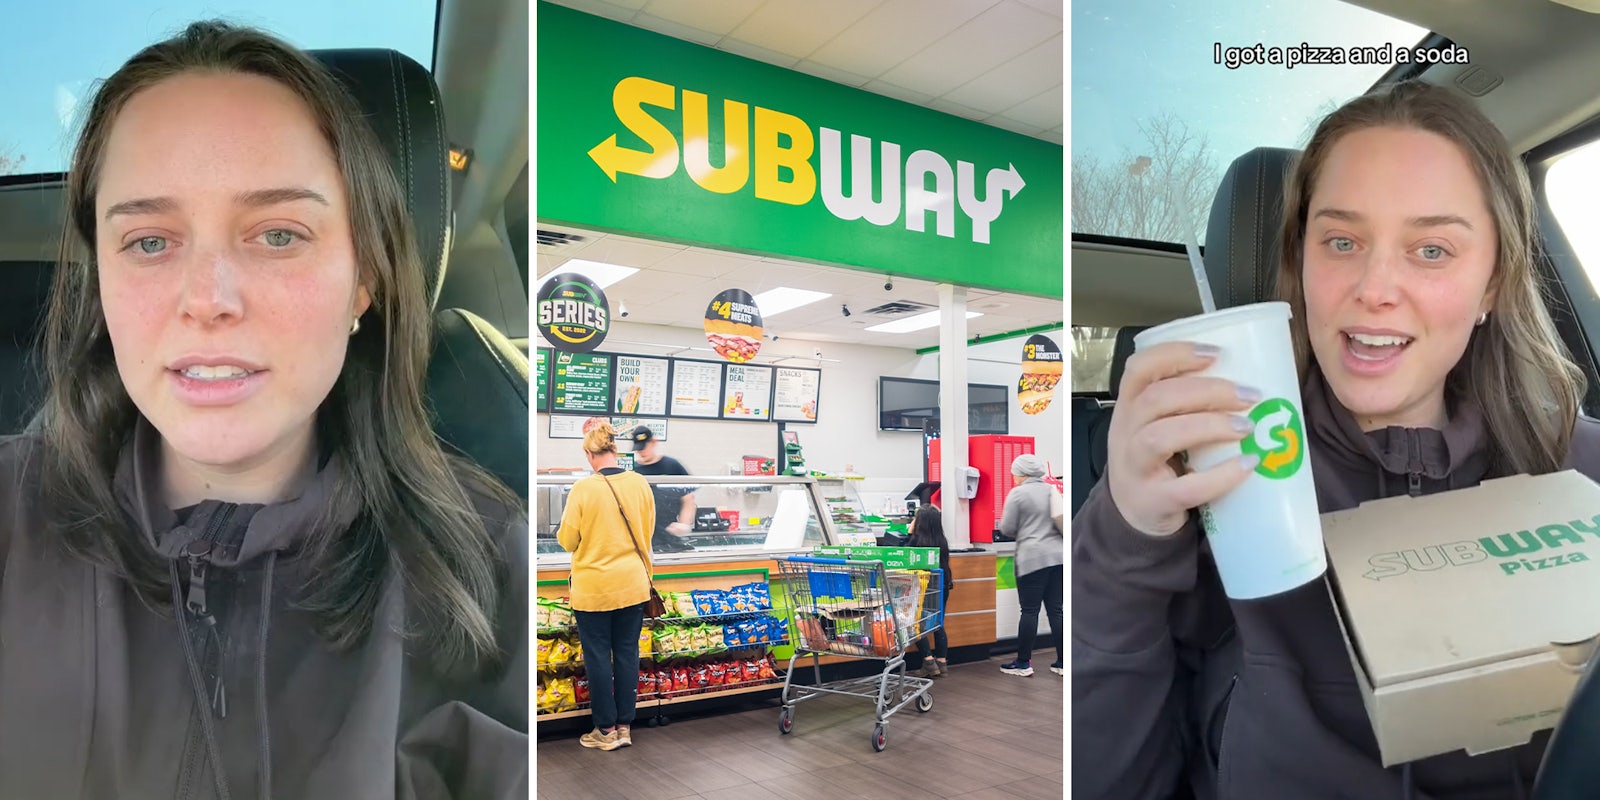 Subway customer goes to counter and asks for ‘Subway pizza.’